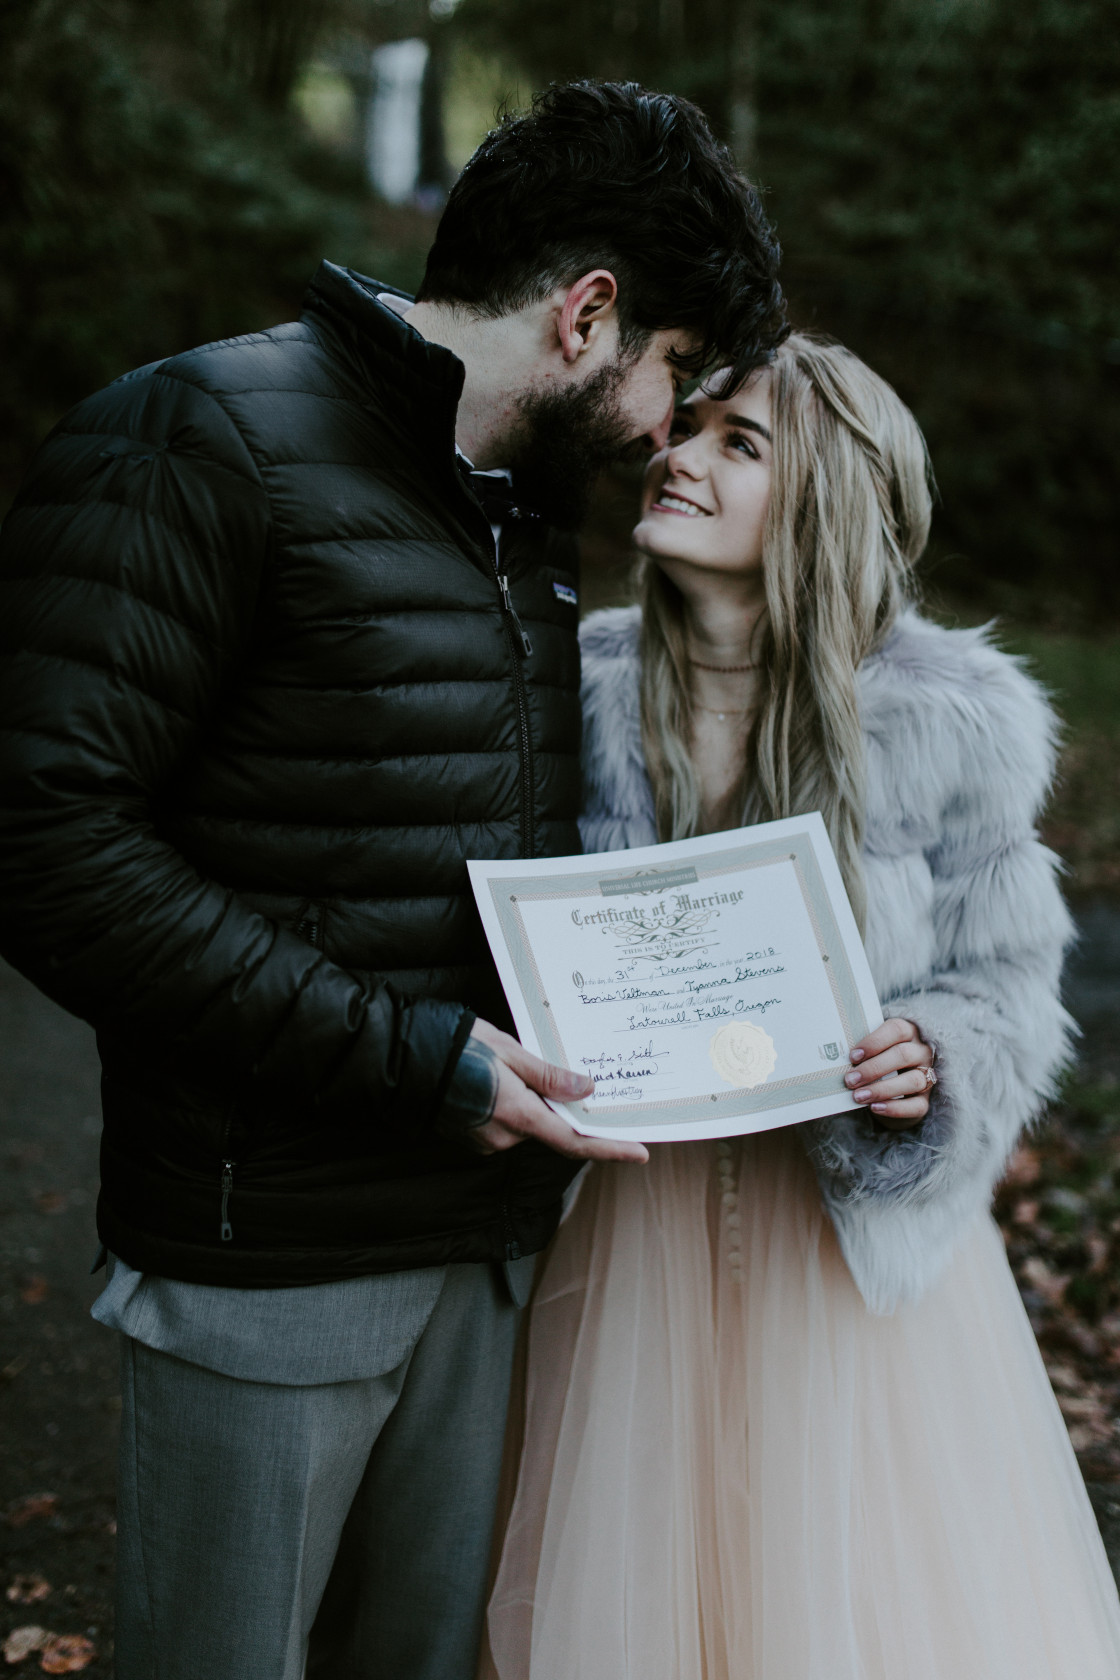 Boris and Tyanna hold their marriage certificate. Adventure elopement in the Columbia River Gorge by Sienna Plus Josh.